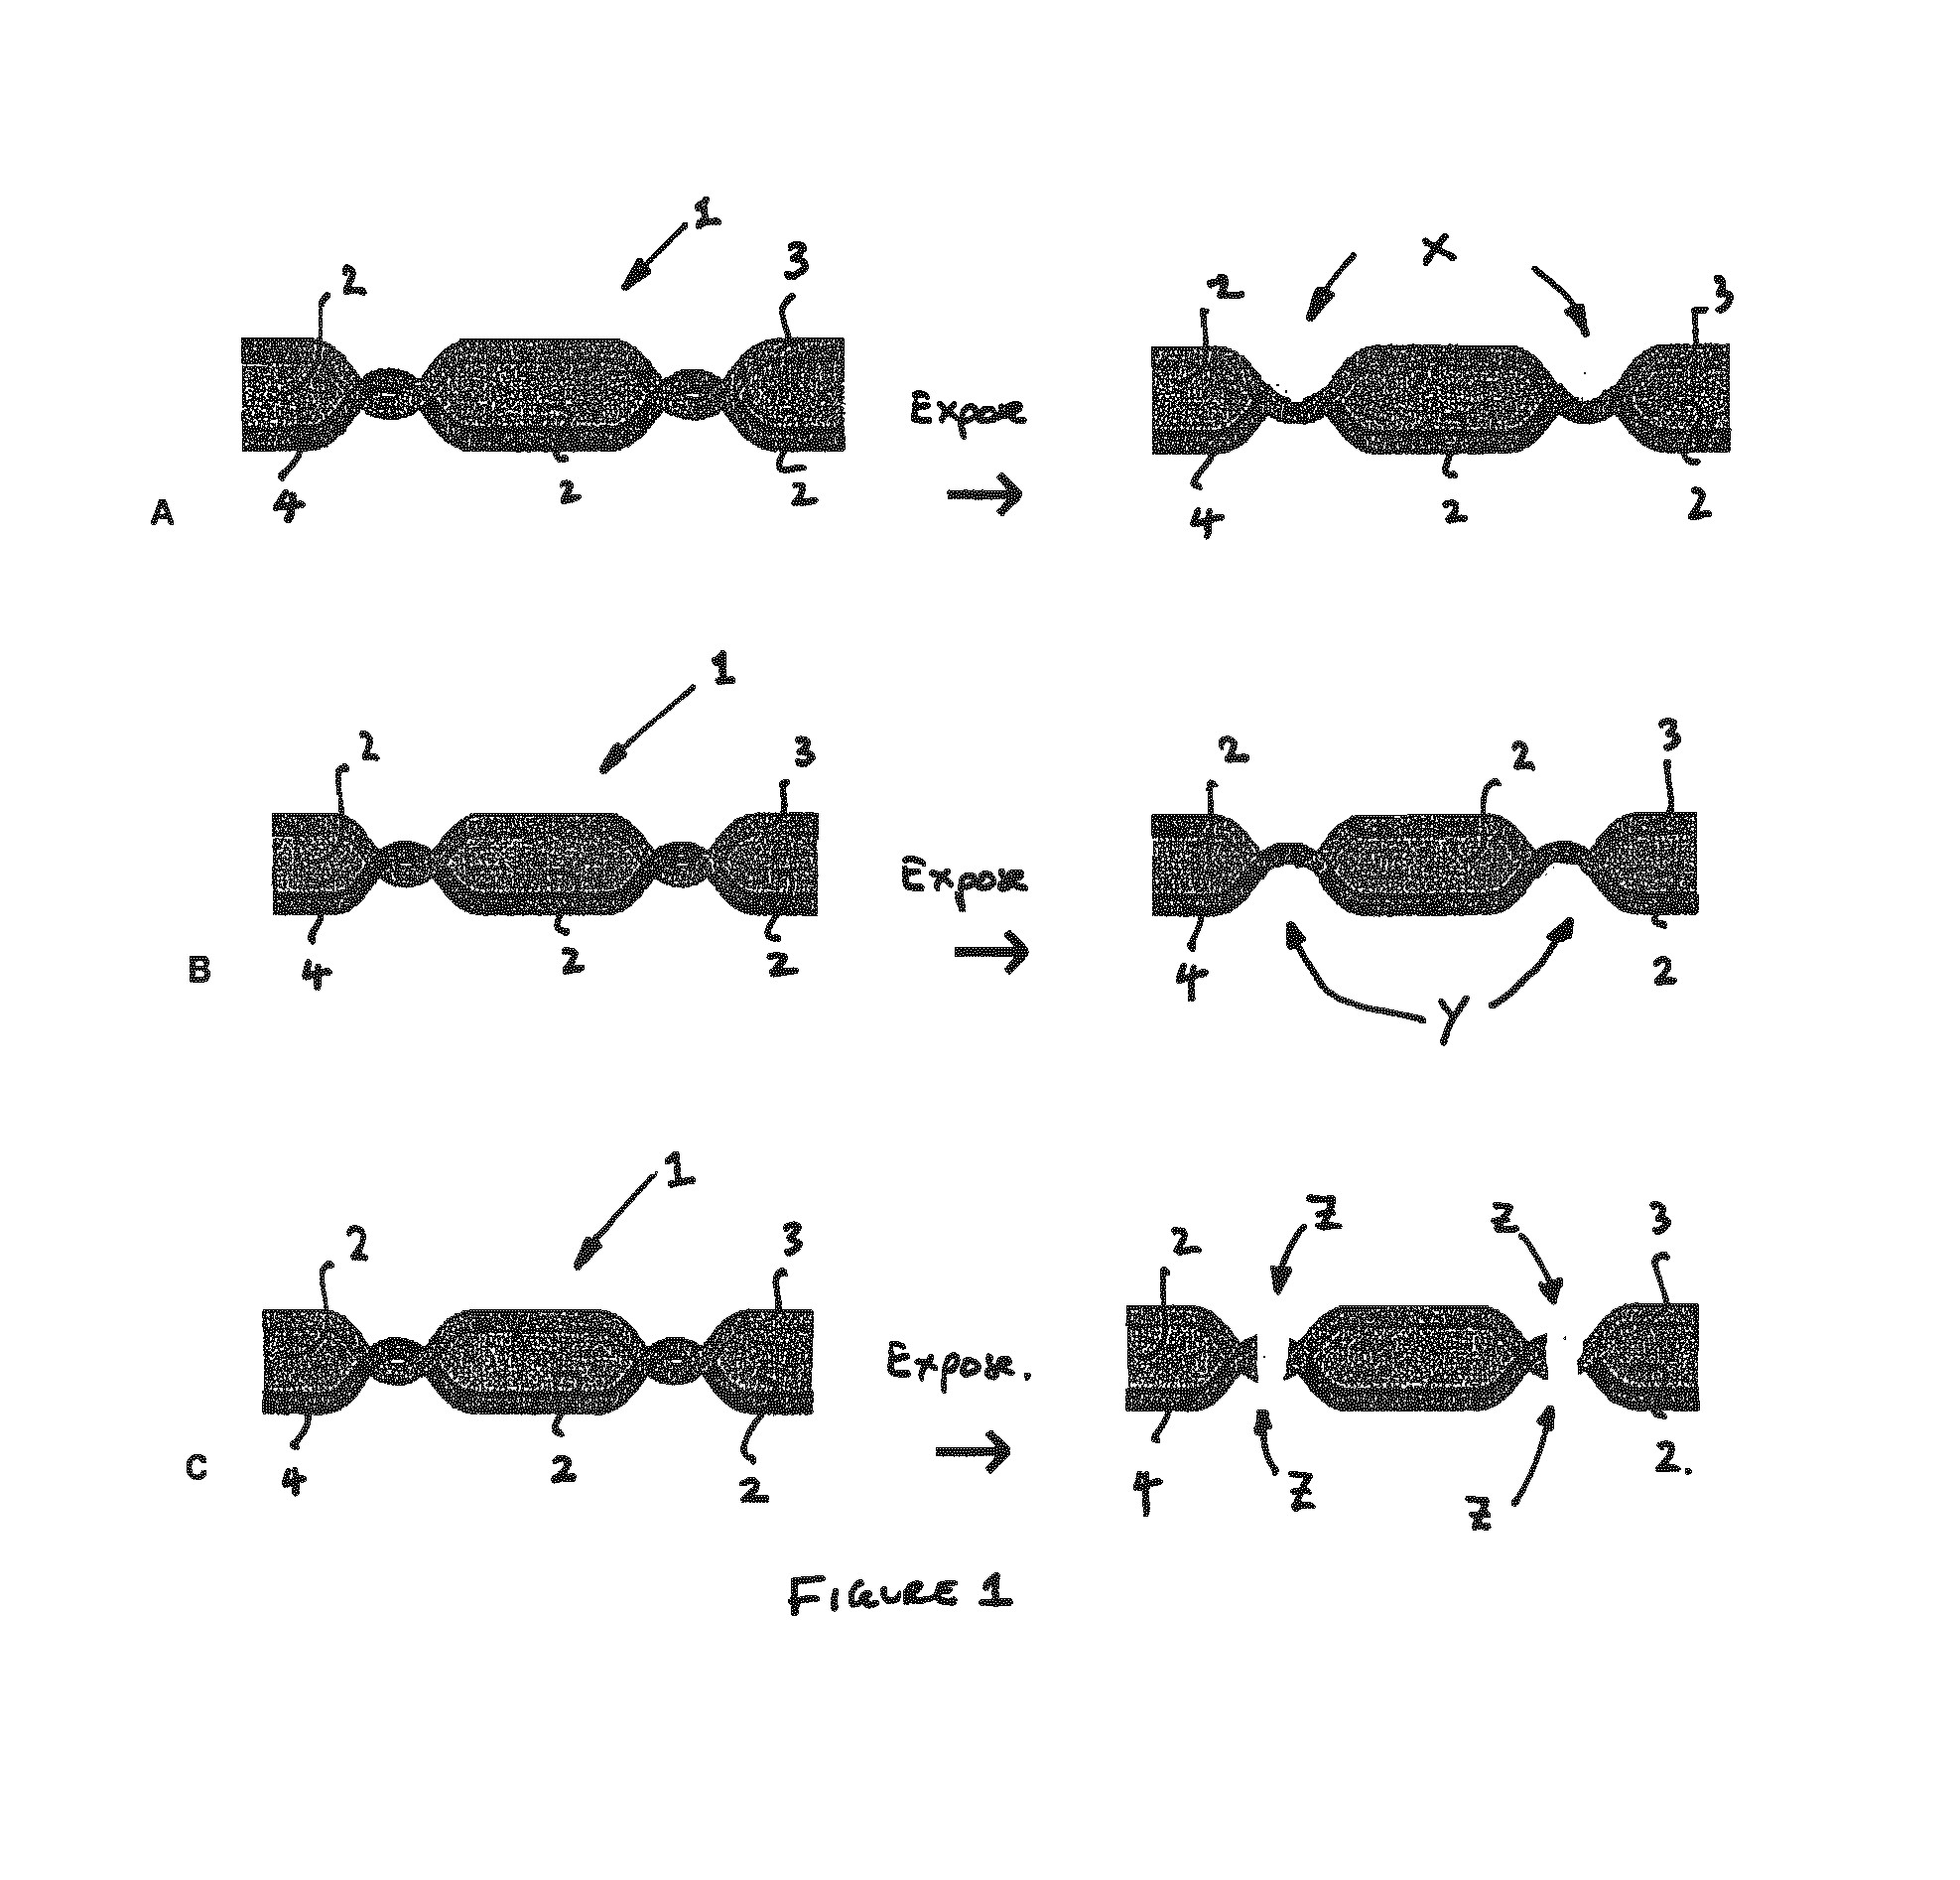 Article assembly disassembly system